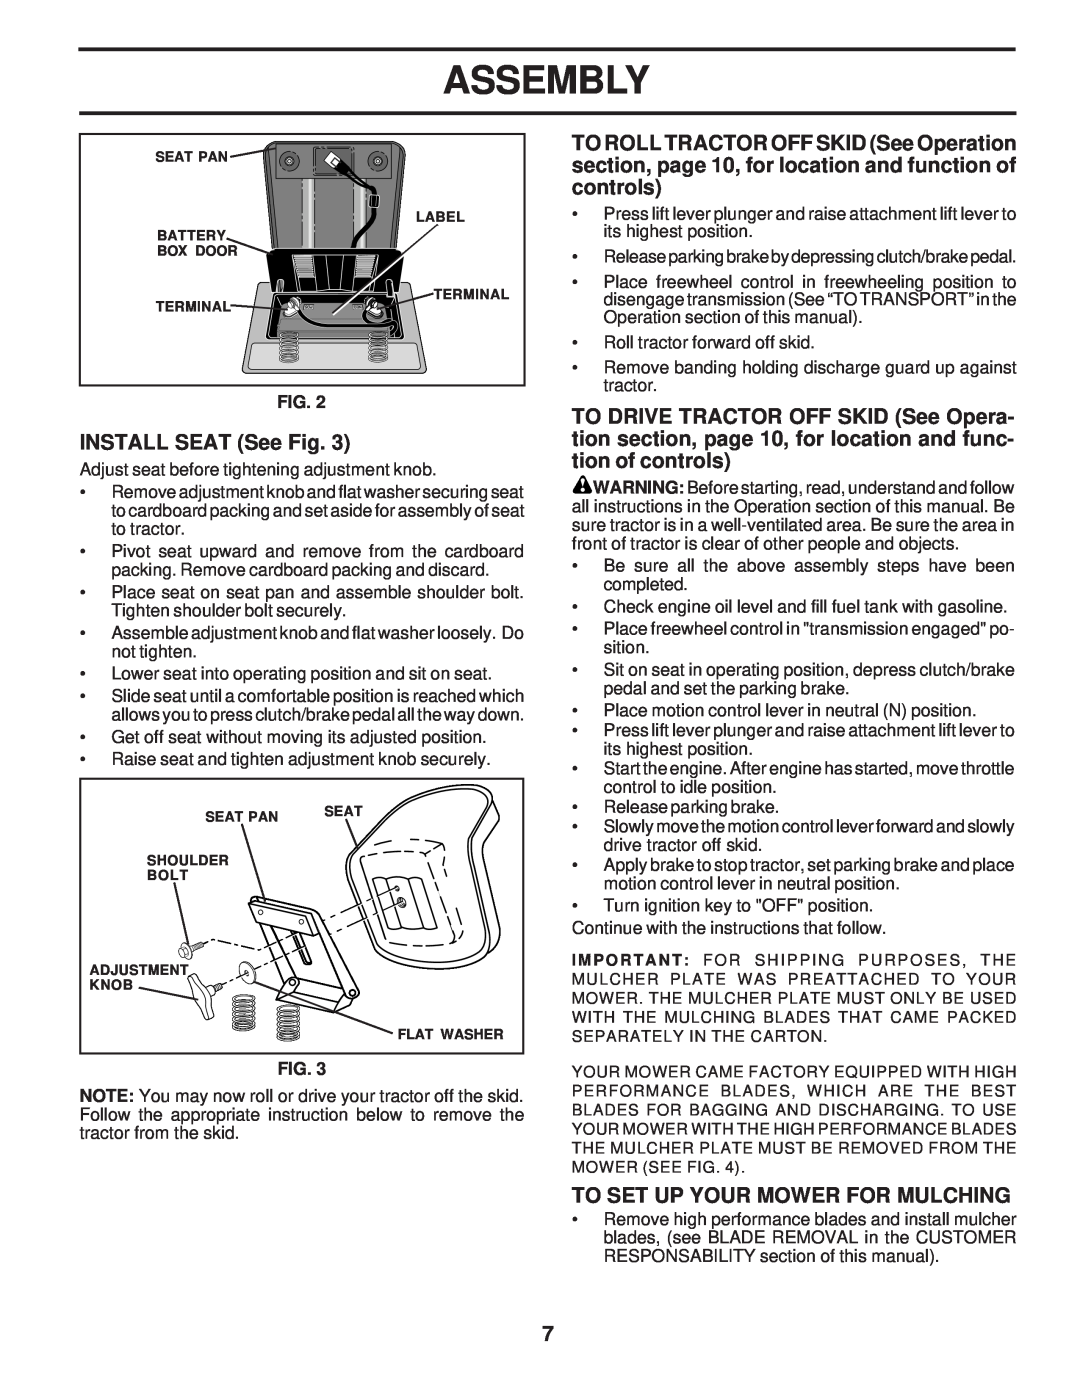 Poulan 173304, PR17H42STA owner manual INSTALL SEAT See Fig, To Set Up Your Mower For Mulching, Assembly 